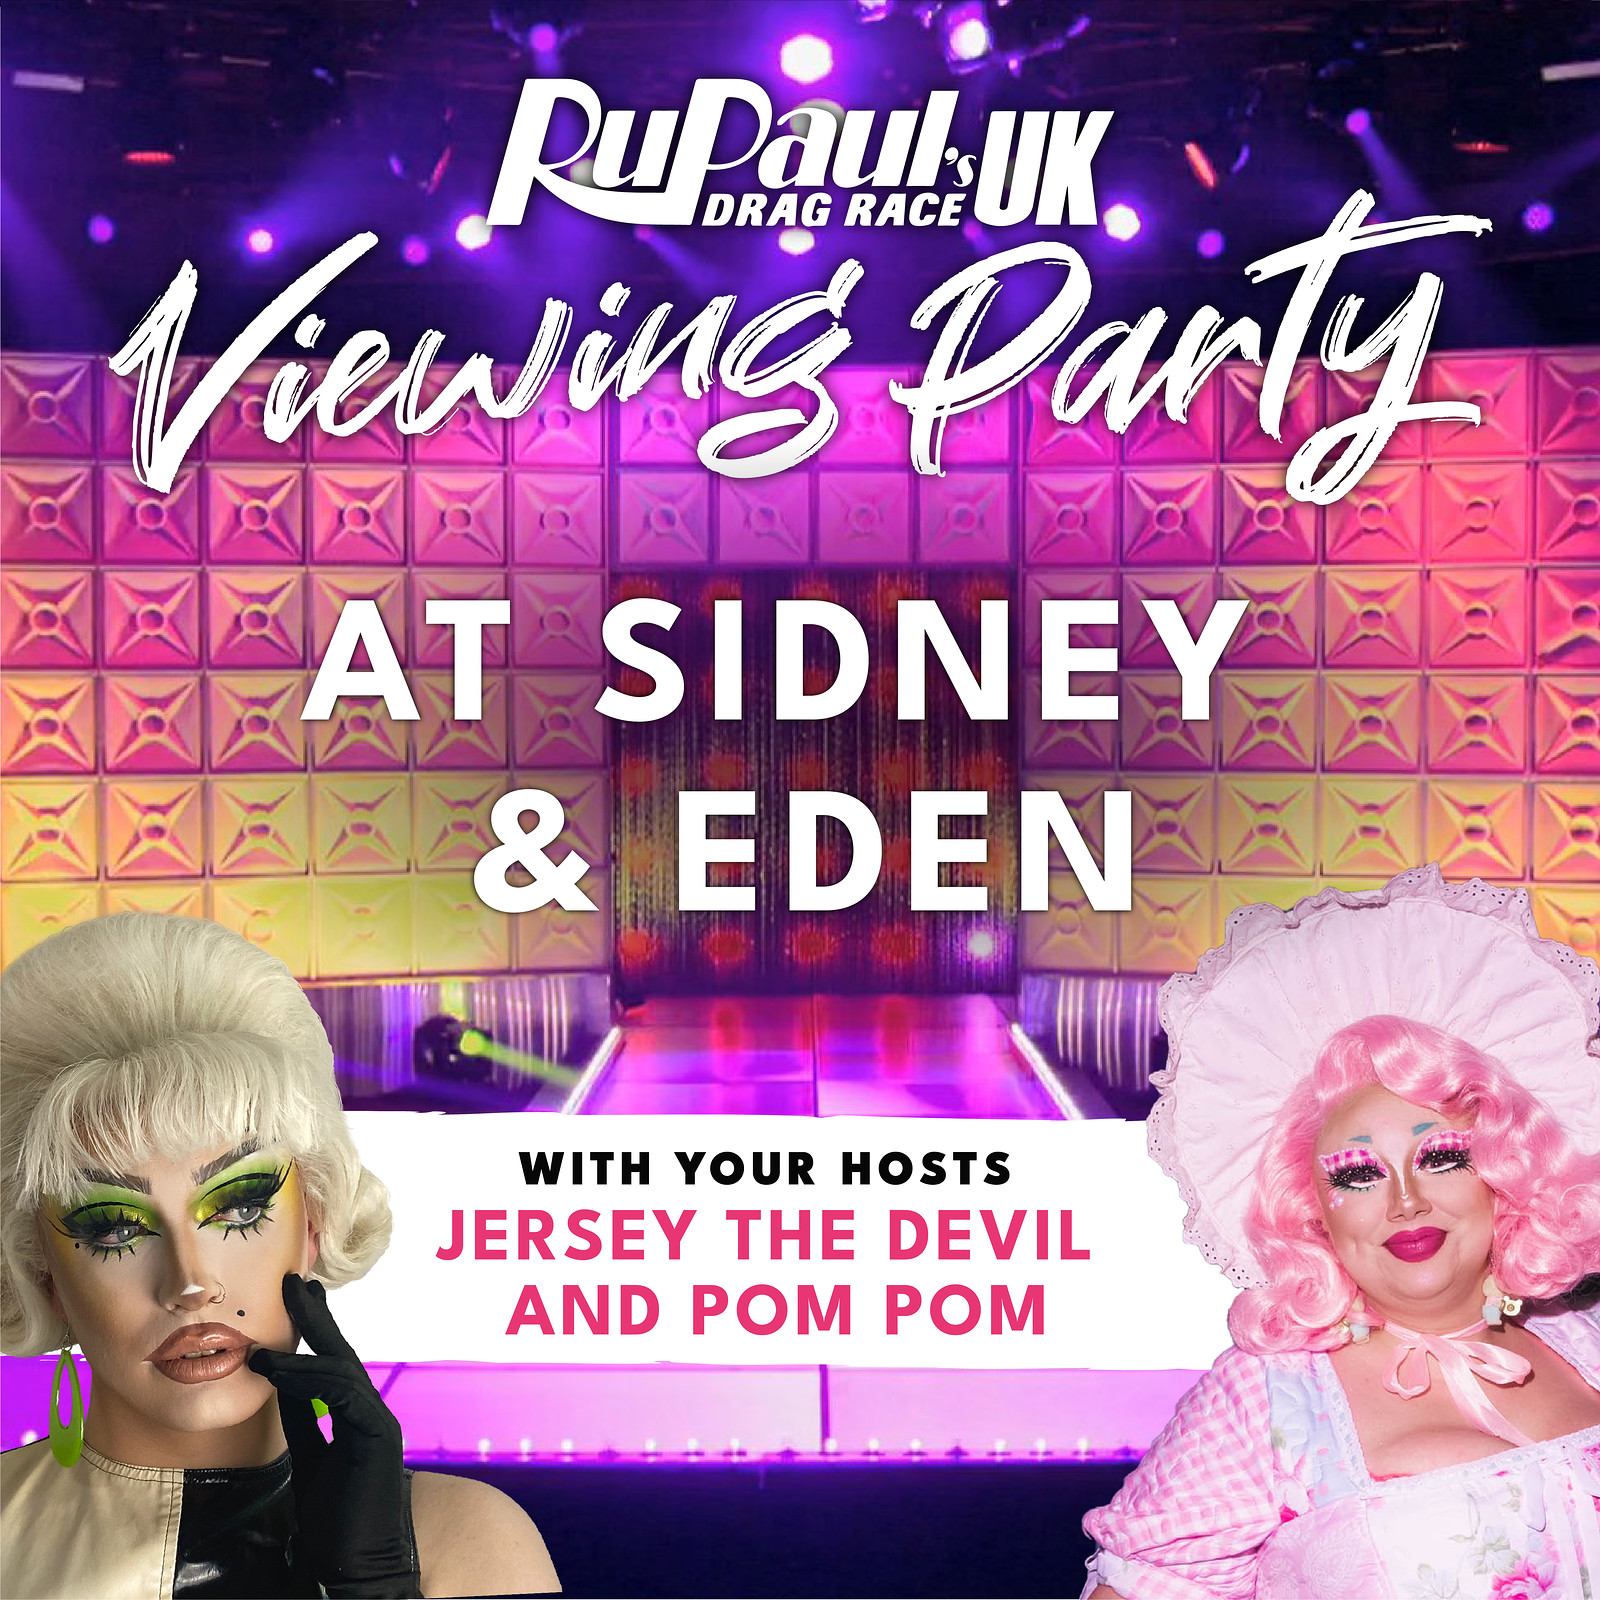 RuPaul's Drag Race UK Episode 3 Viewing Party at Sidney & Eden